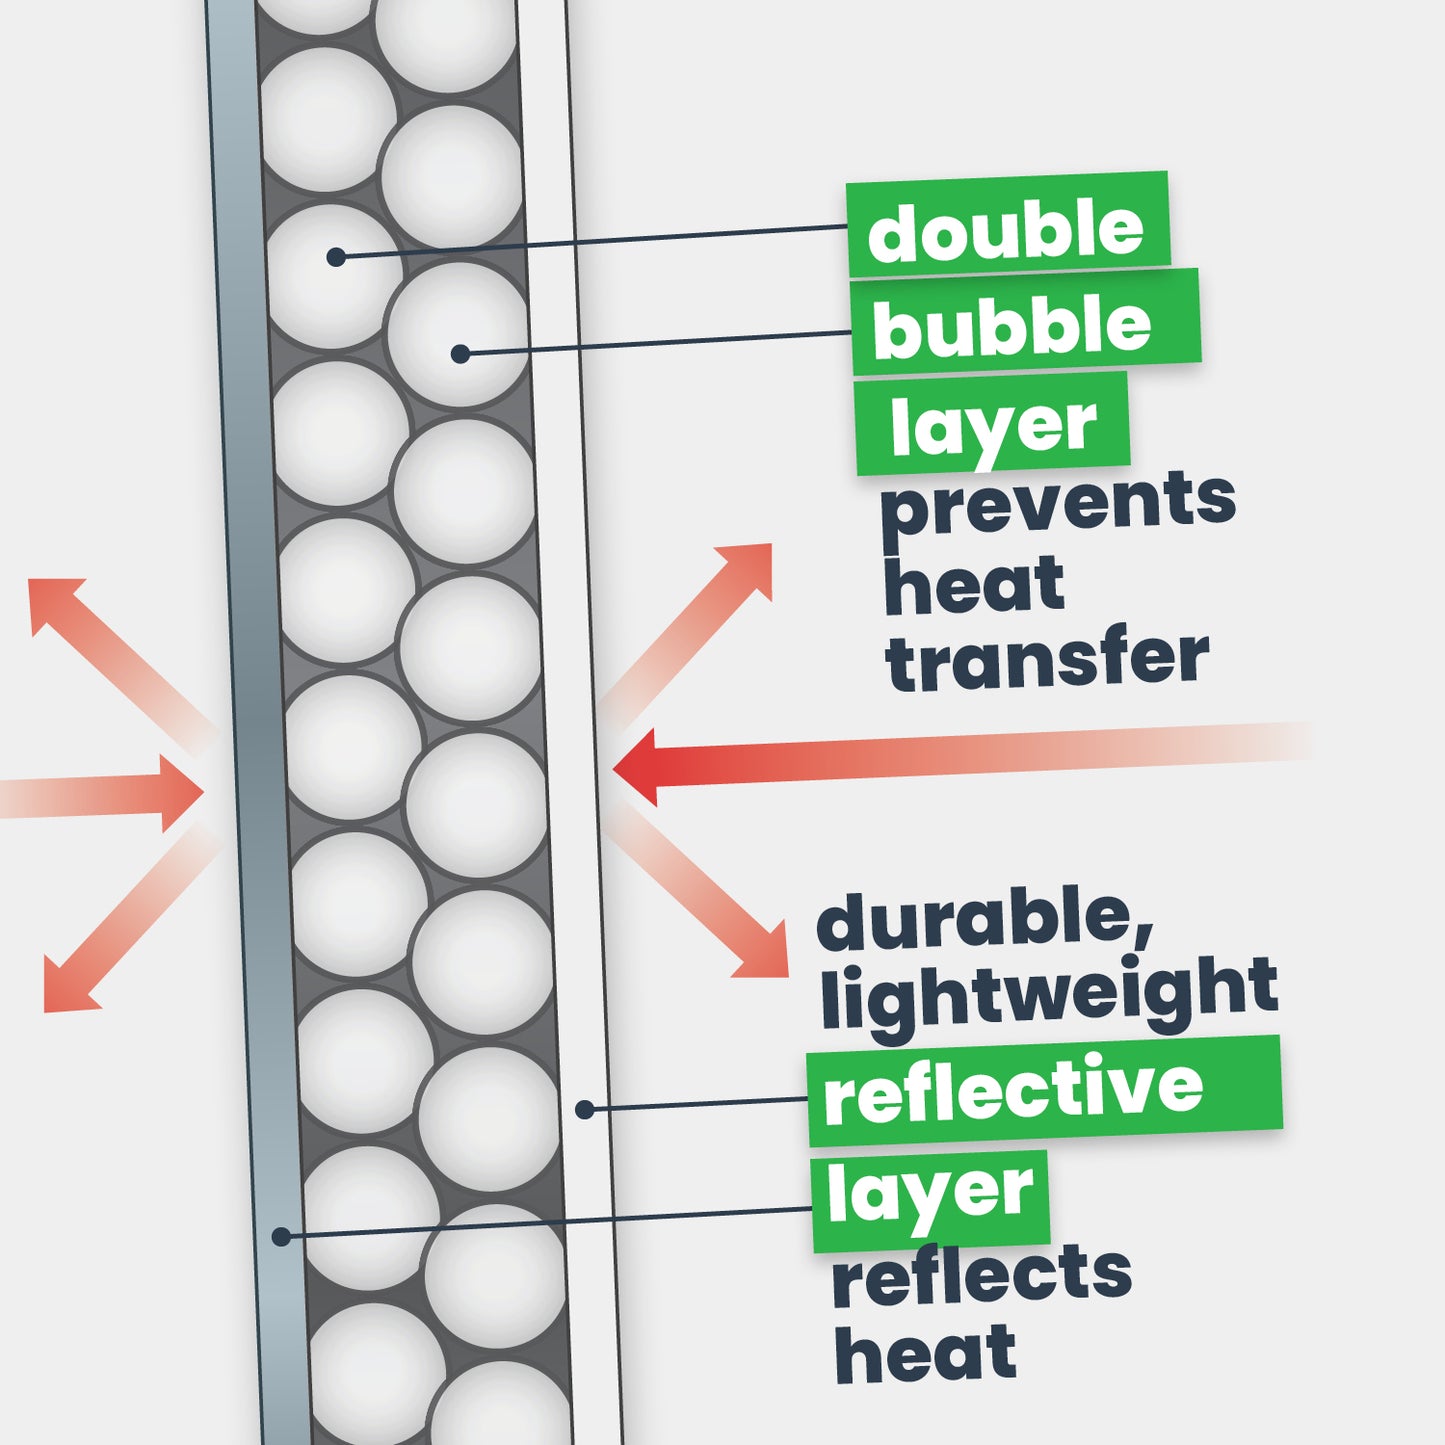 double bubble layer prevents heat transfer. durable, lightweight reflective layer reflects radiant heat